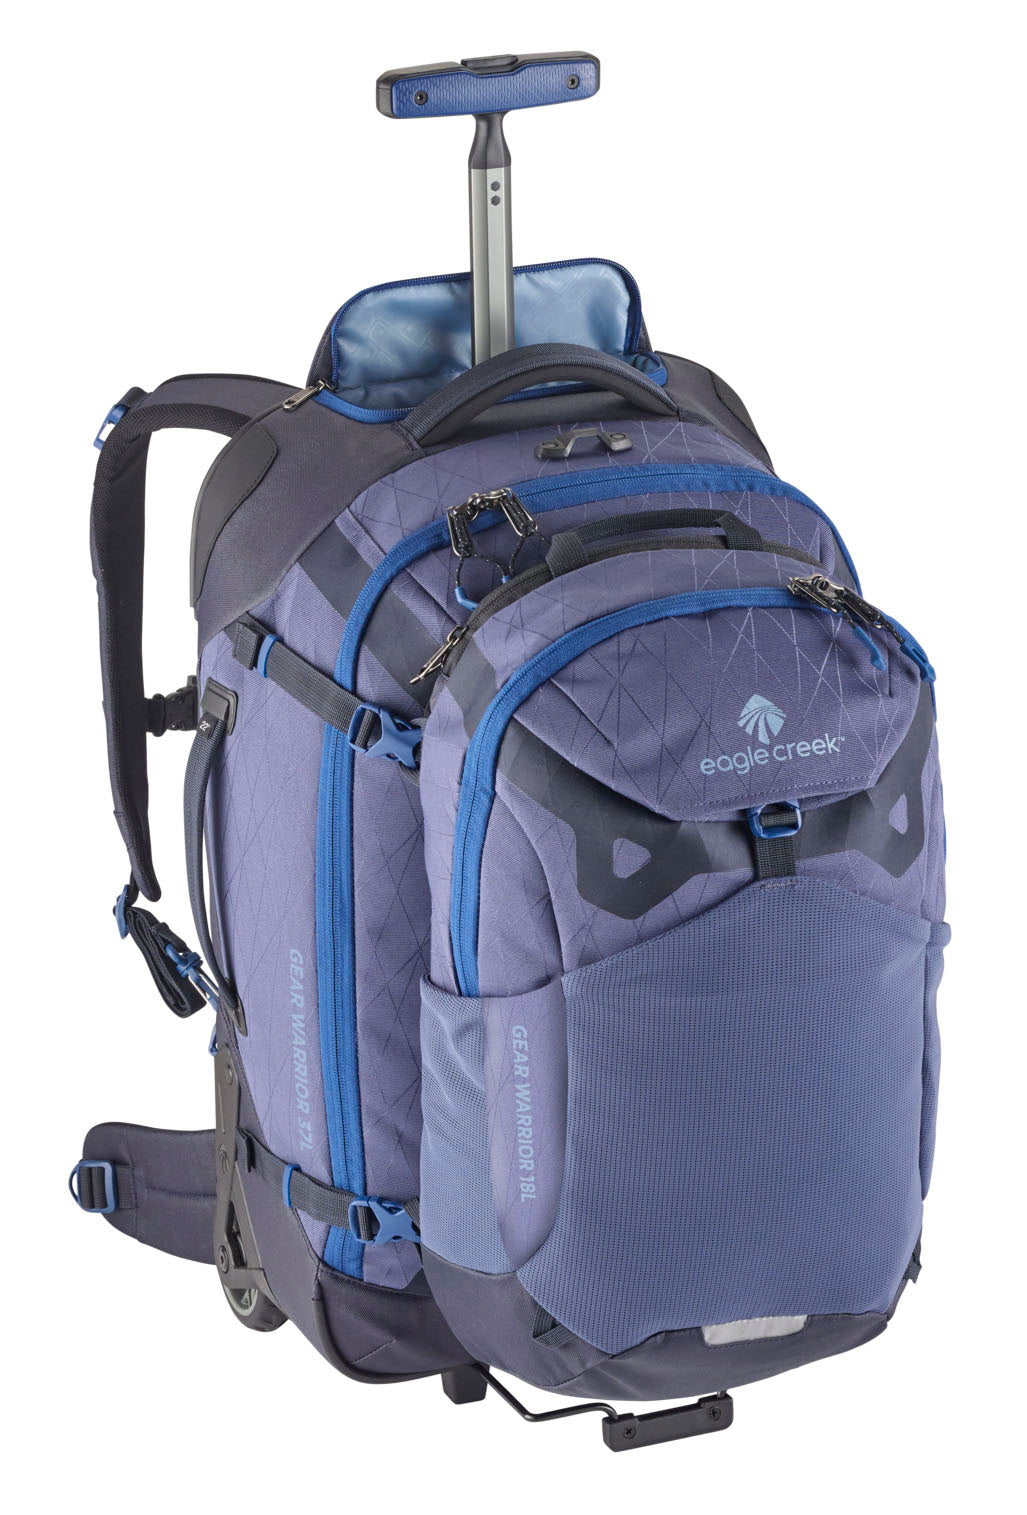 Eagle Creek Warrior™ Convertible Carry On Bag in Arctic Blue